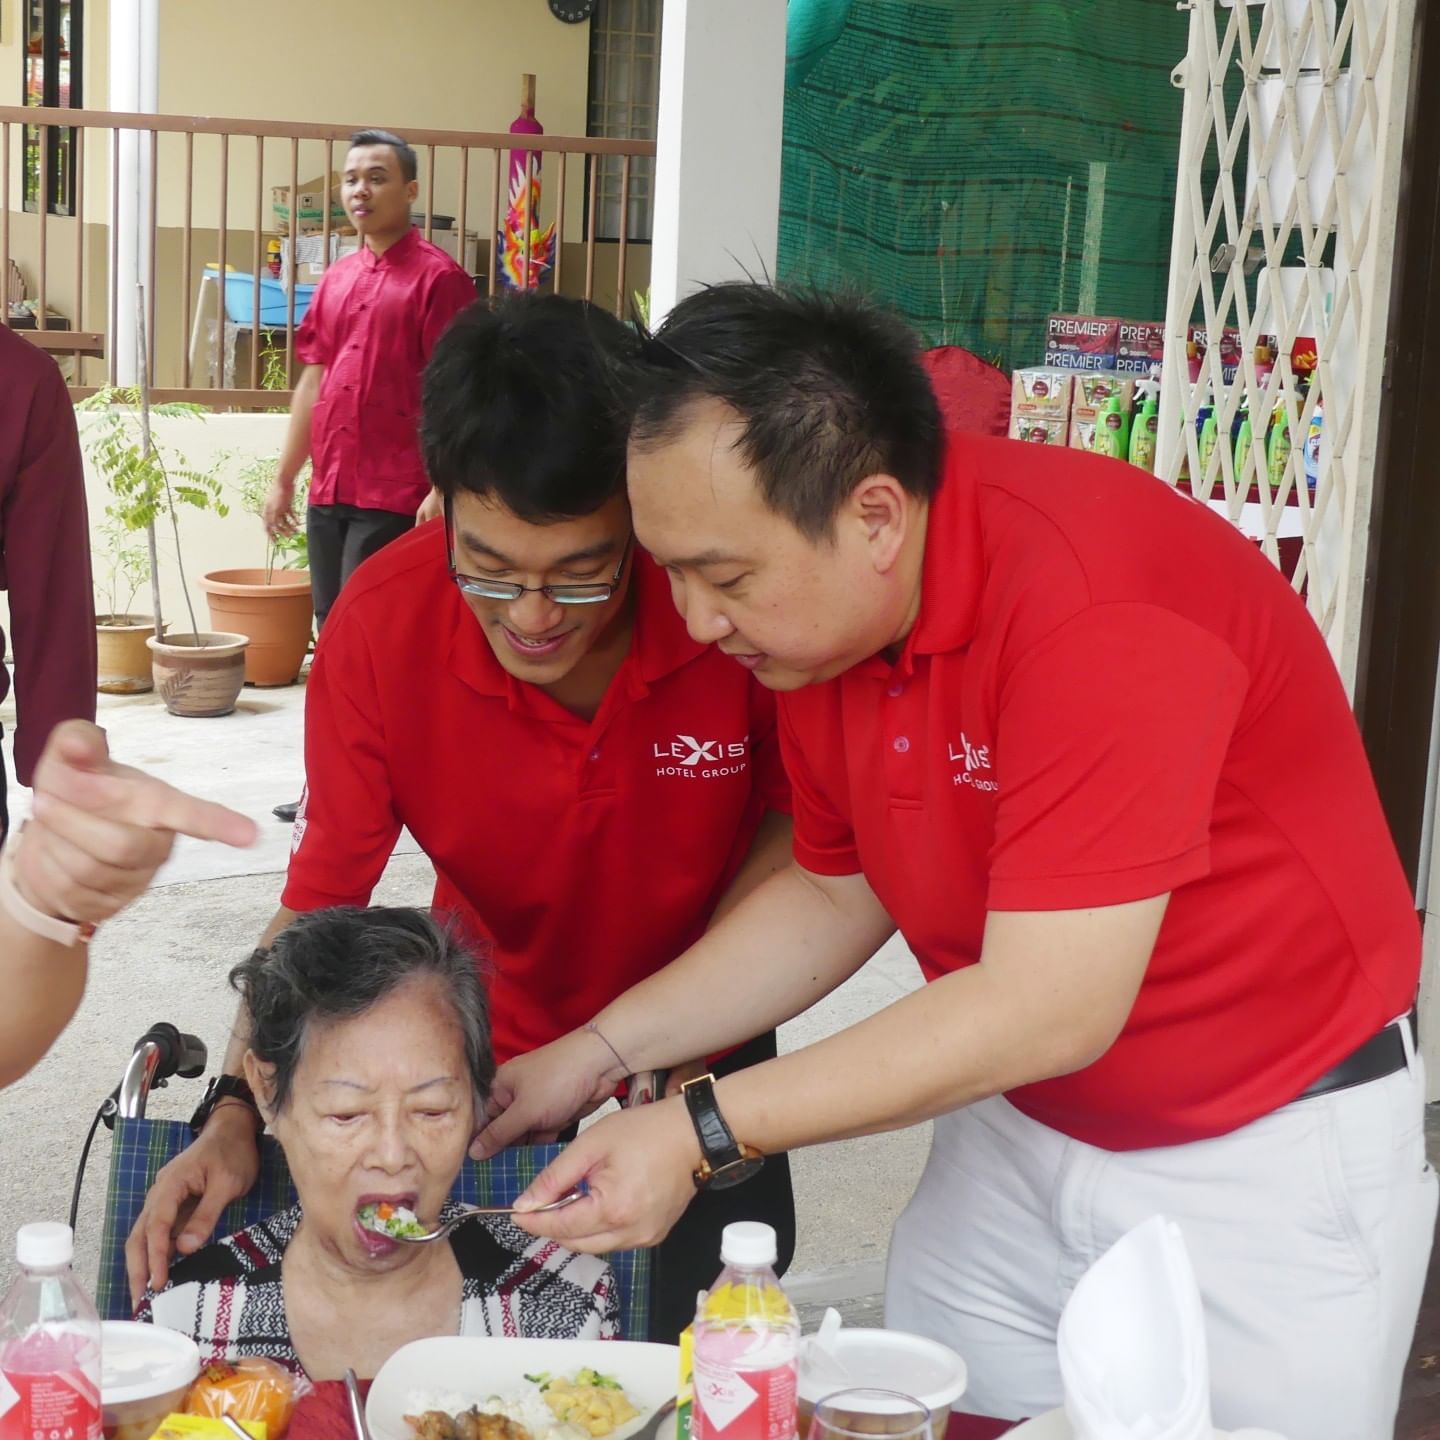 Lexis Suites Penang Brings Festive Chinese New Year Cheers To 8 Underprivileged Old Folks